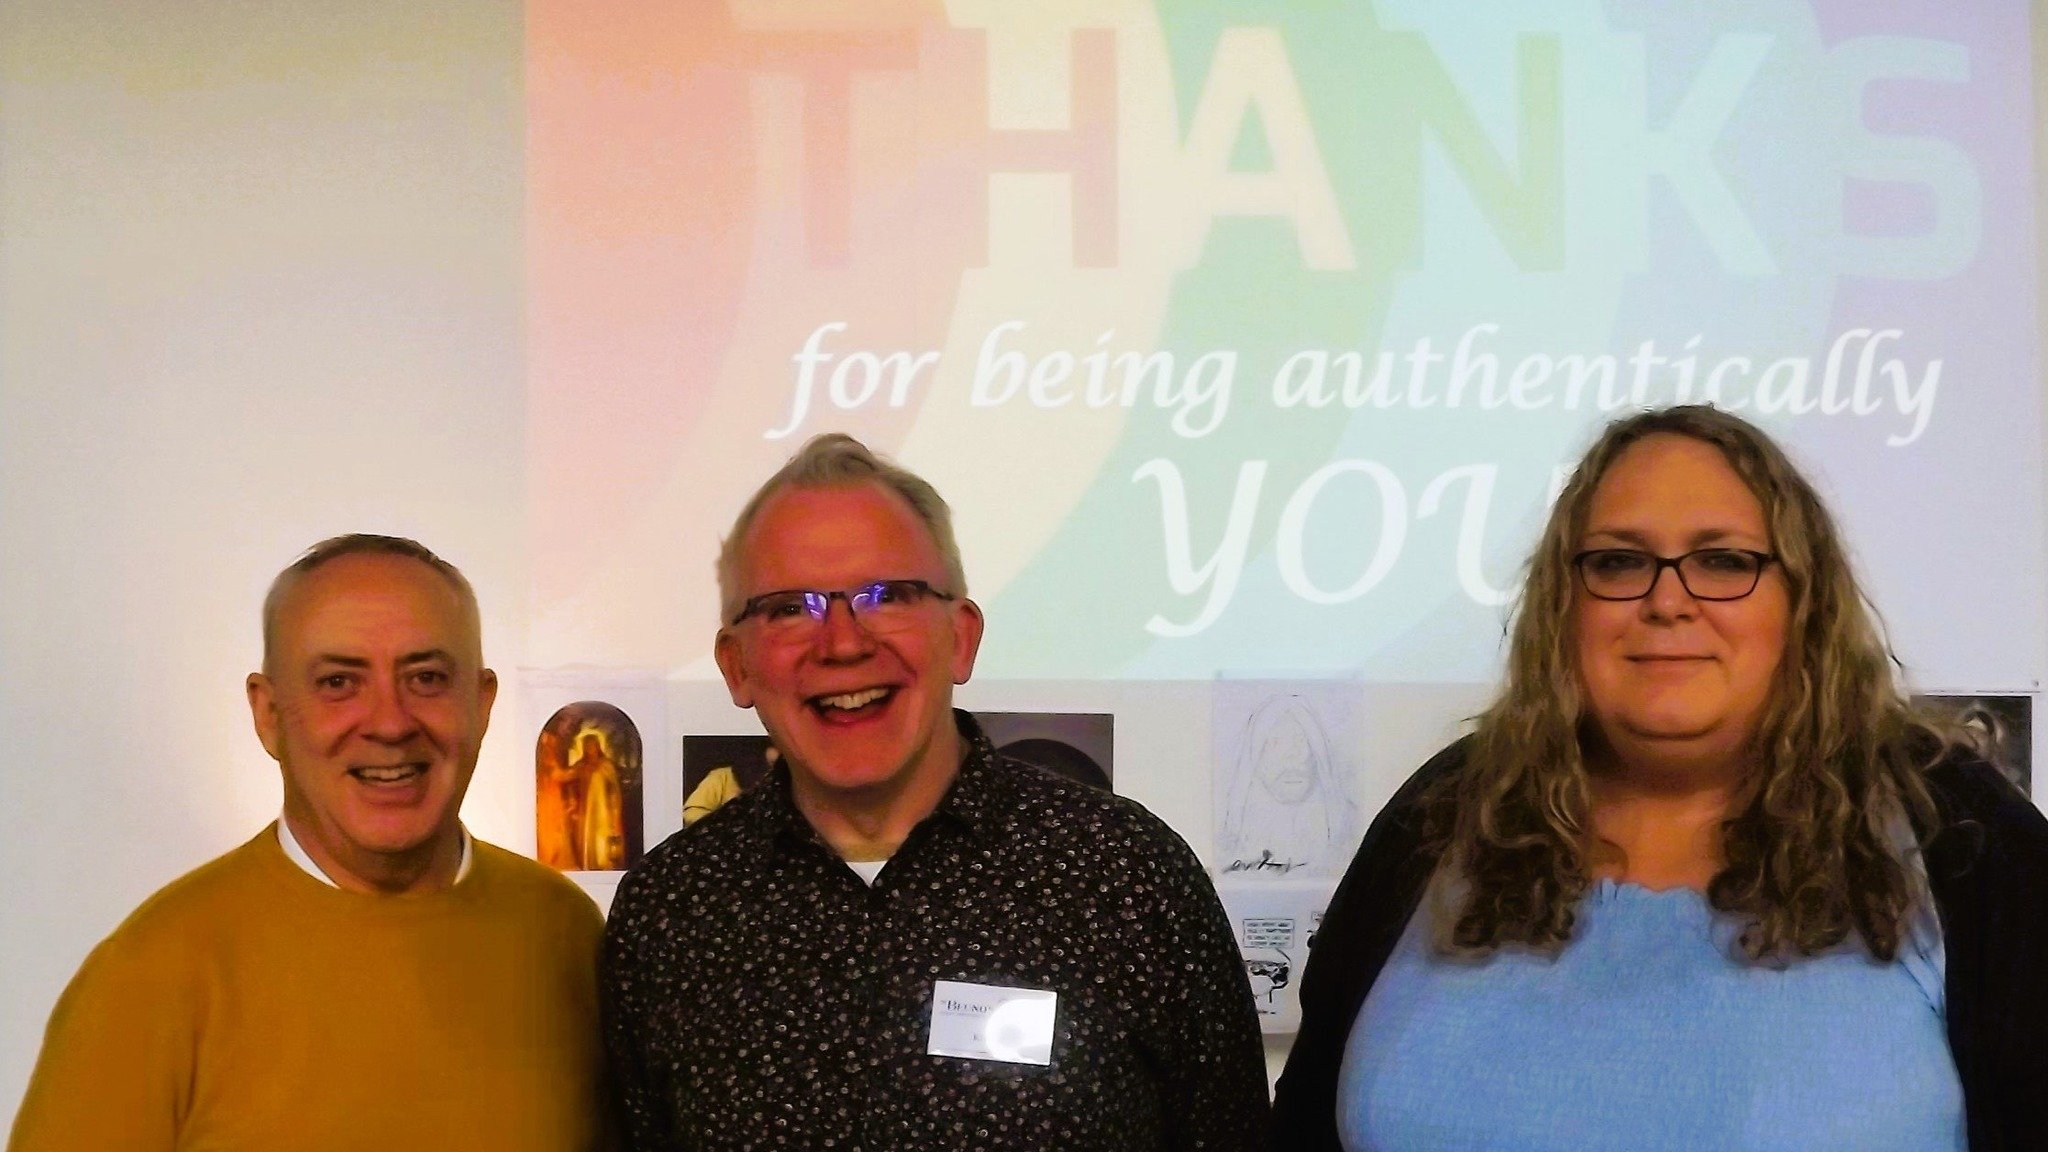  Leading a weekend retreat for LGBTQIA+ Christians in November 2022 were Frank from Quest, Kieran and Sarah from the Open Table Network. They are standing in front of a slide projected on the wall behind them which says ‘THANKS for being authenticall